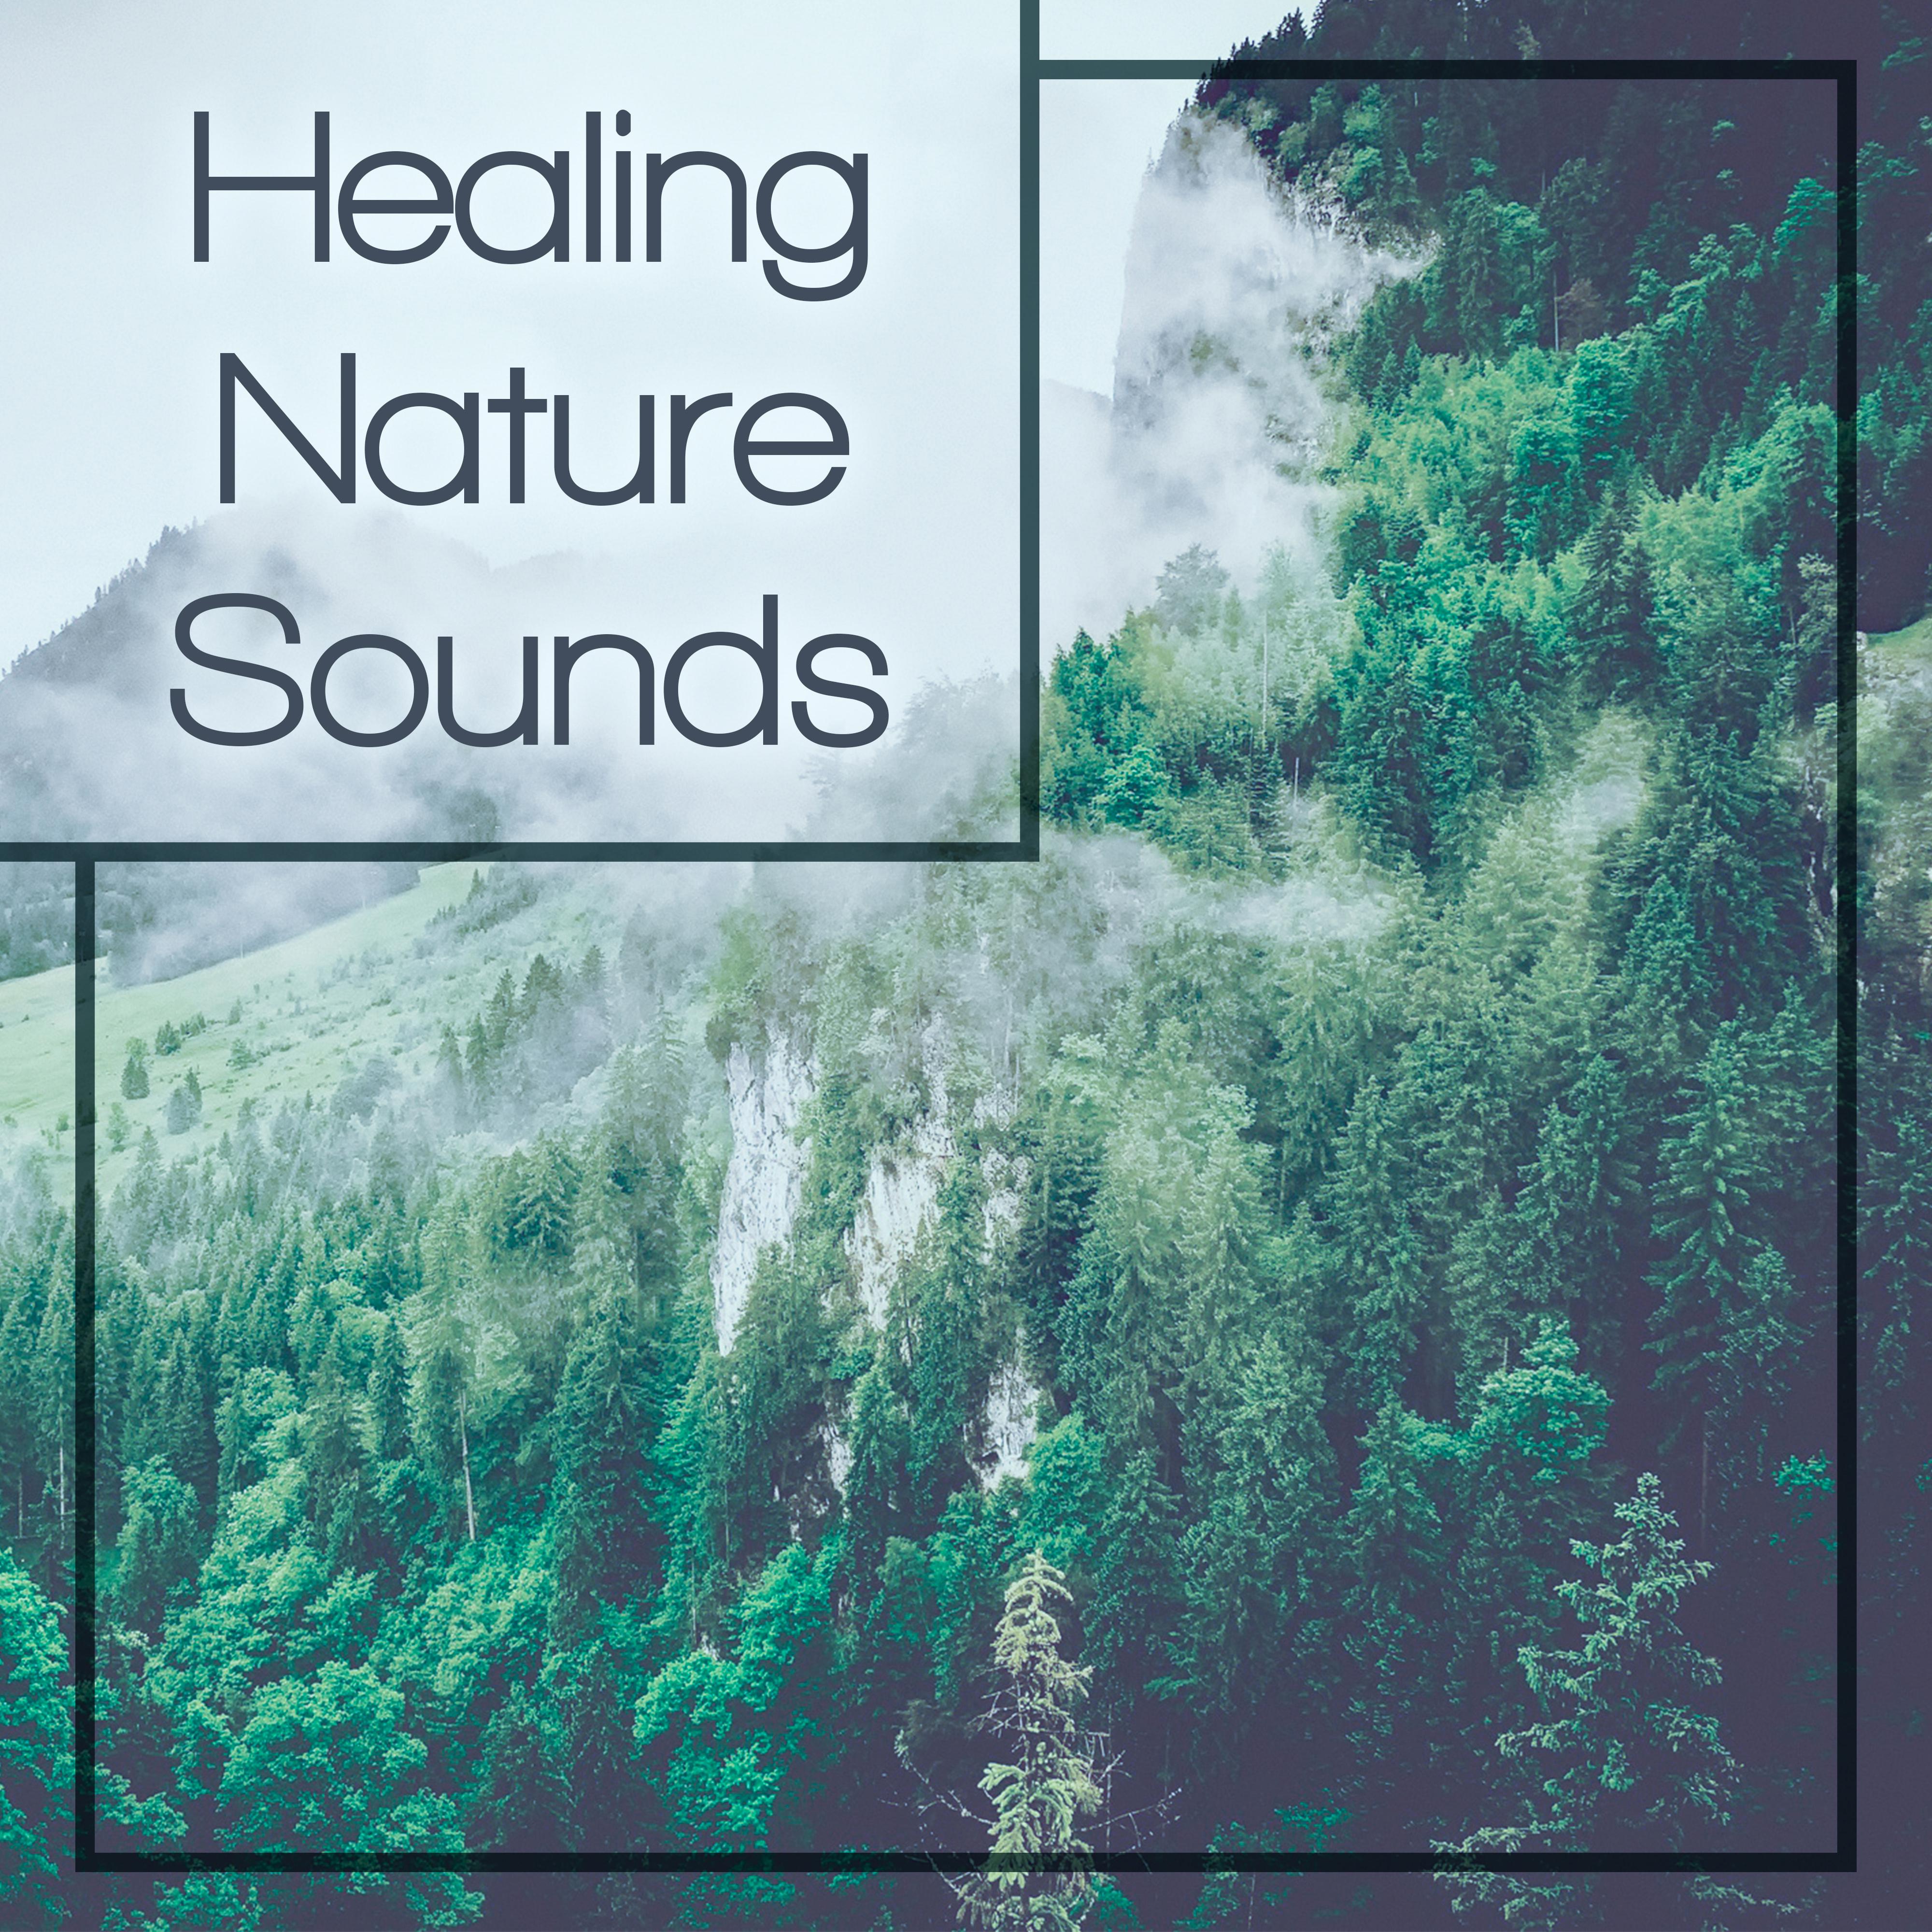 Healing Nature Sounds – Soothing Nature Music, Waves of Calmness, Zen Garden, New Age Relaxation